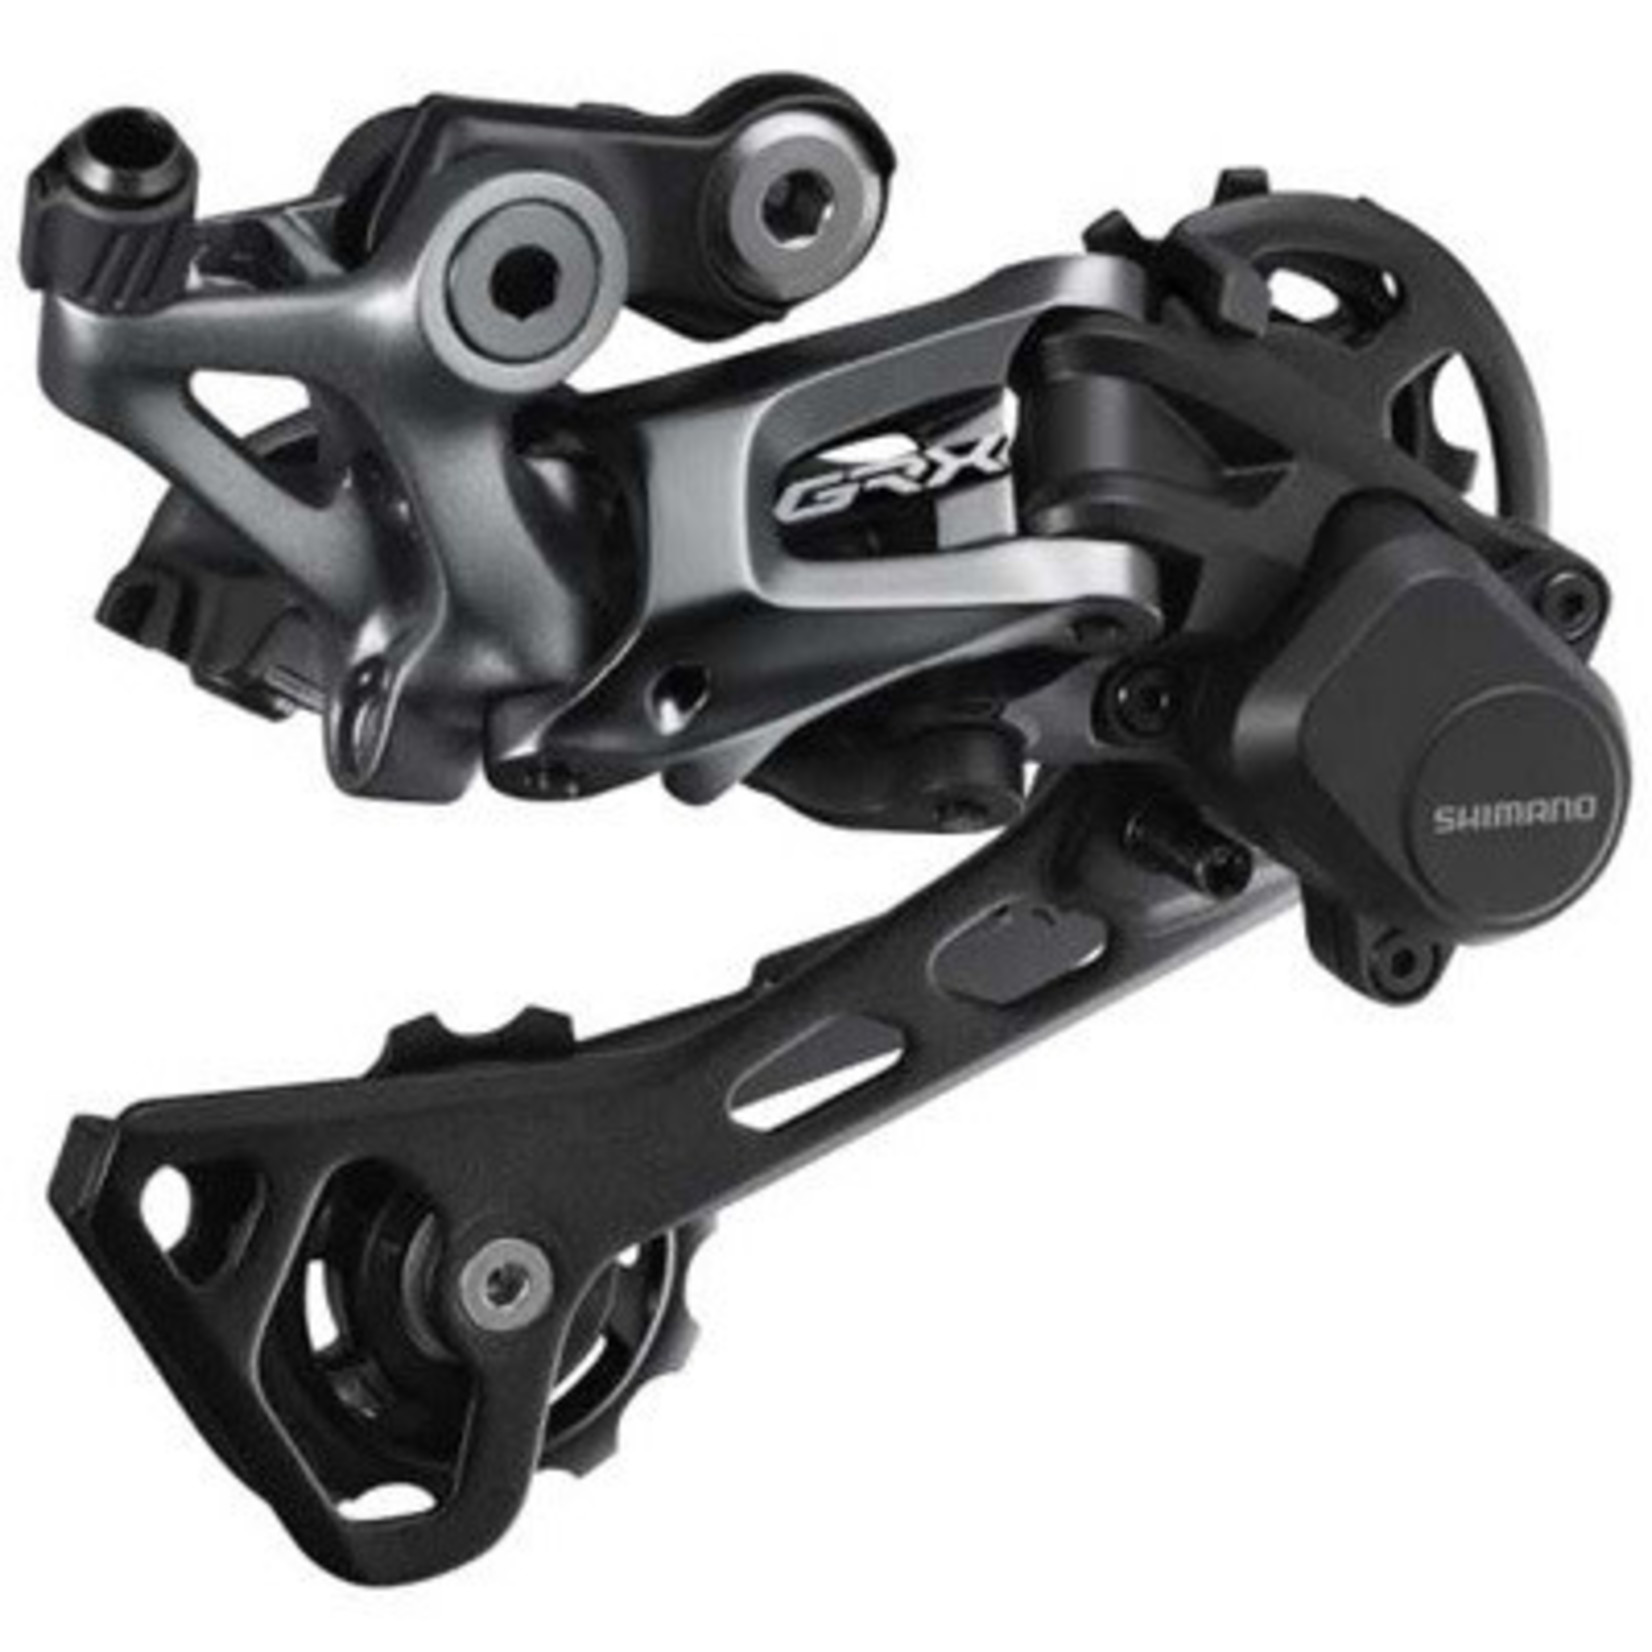 Shimano GRX RD-RX812 Rear Derailleur - 11-Speed, Long Cage, Black, With Clutch, For 1x